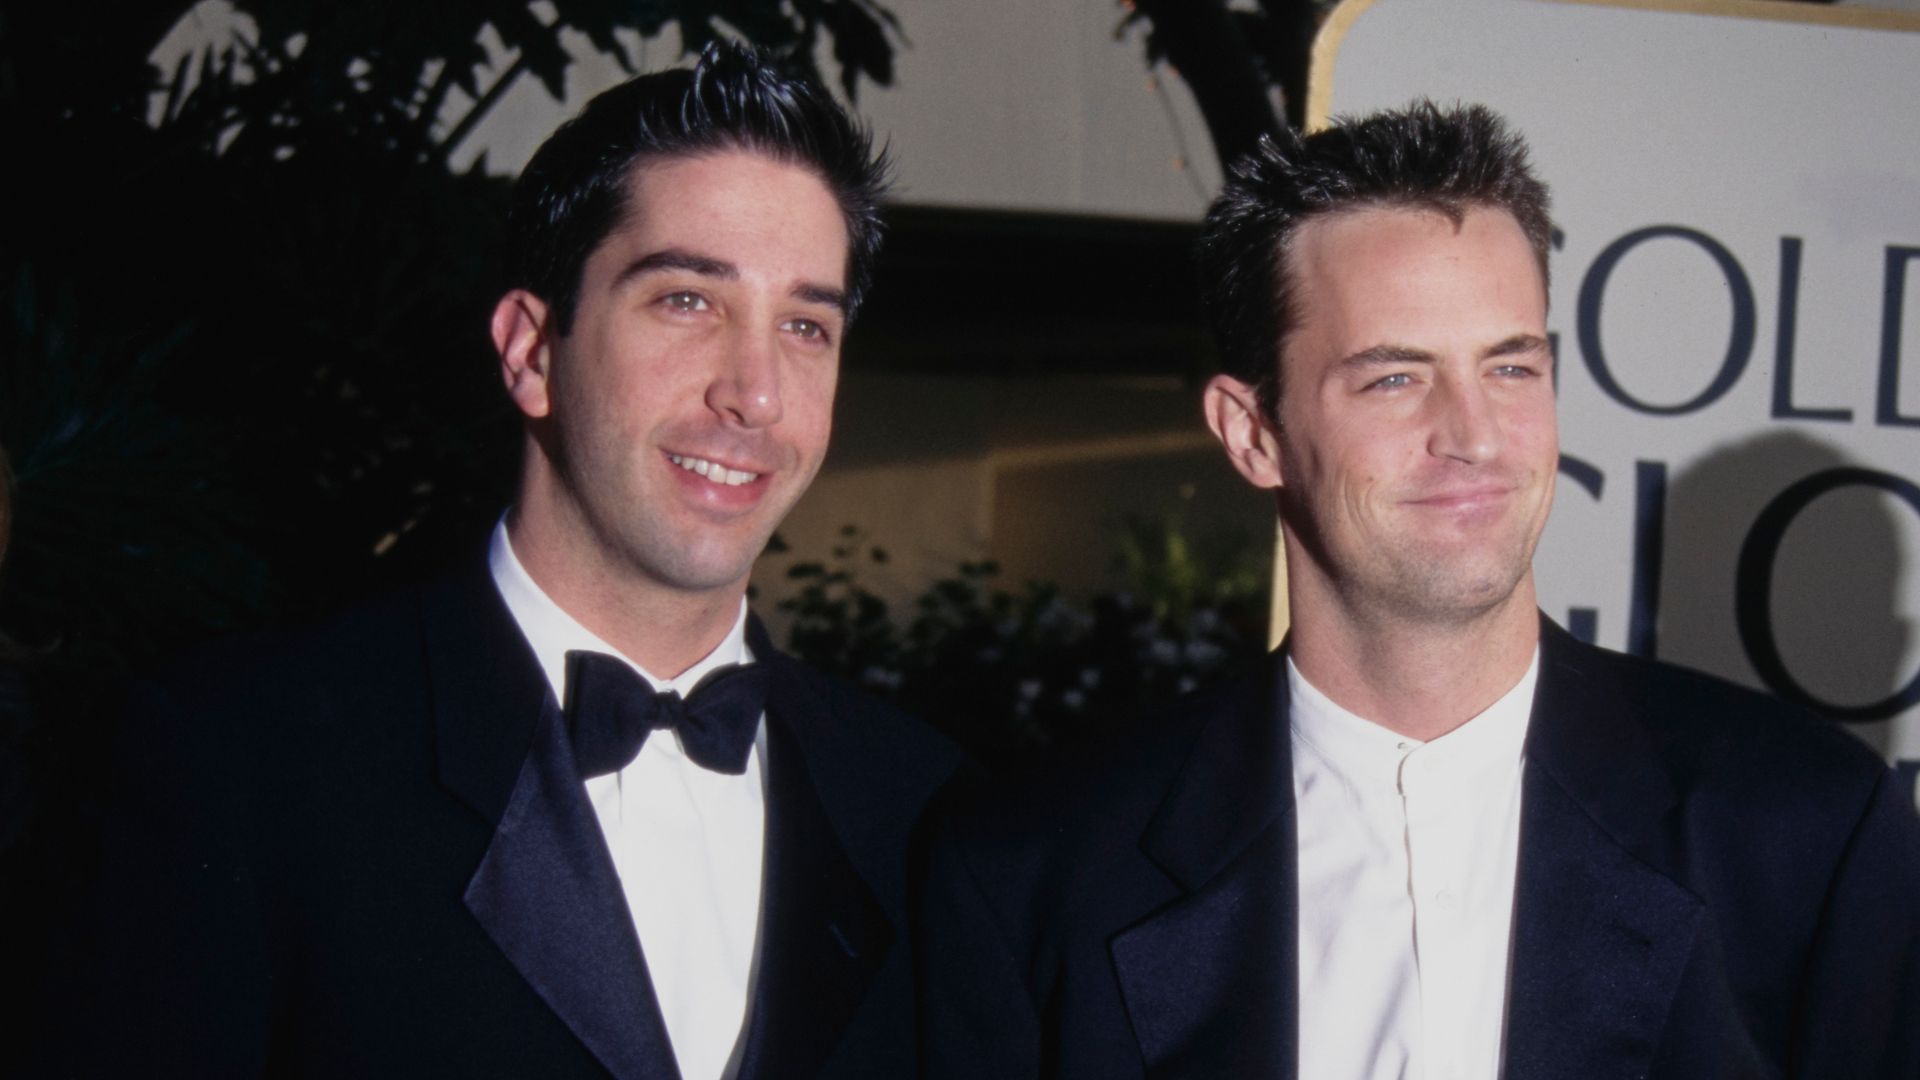 American actor David Schwimmer and Canadian-American actor Matthew Perry attend the 54th Golden Globe Awards, held at the Beverly Hilton Hotel in Beverly Hills, California, 19th January 1997. The man to the right of the frame is